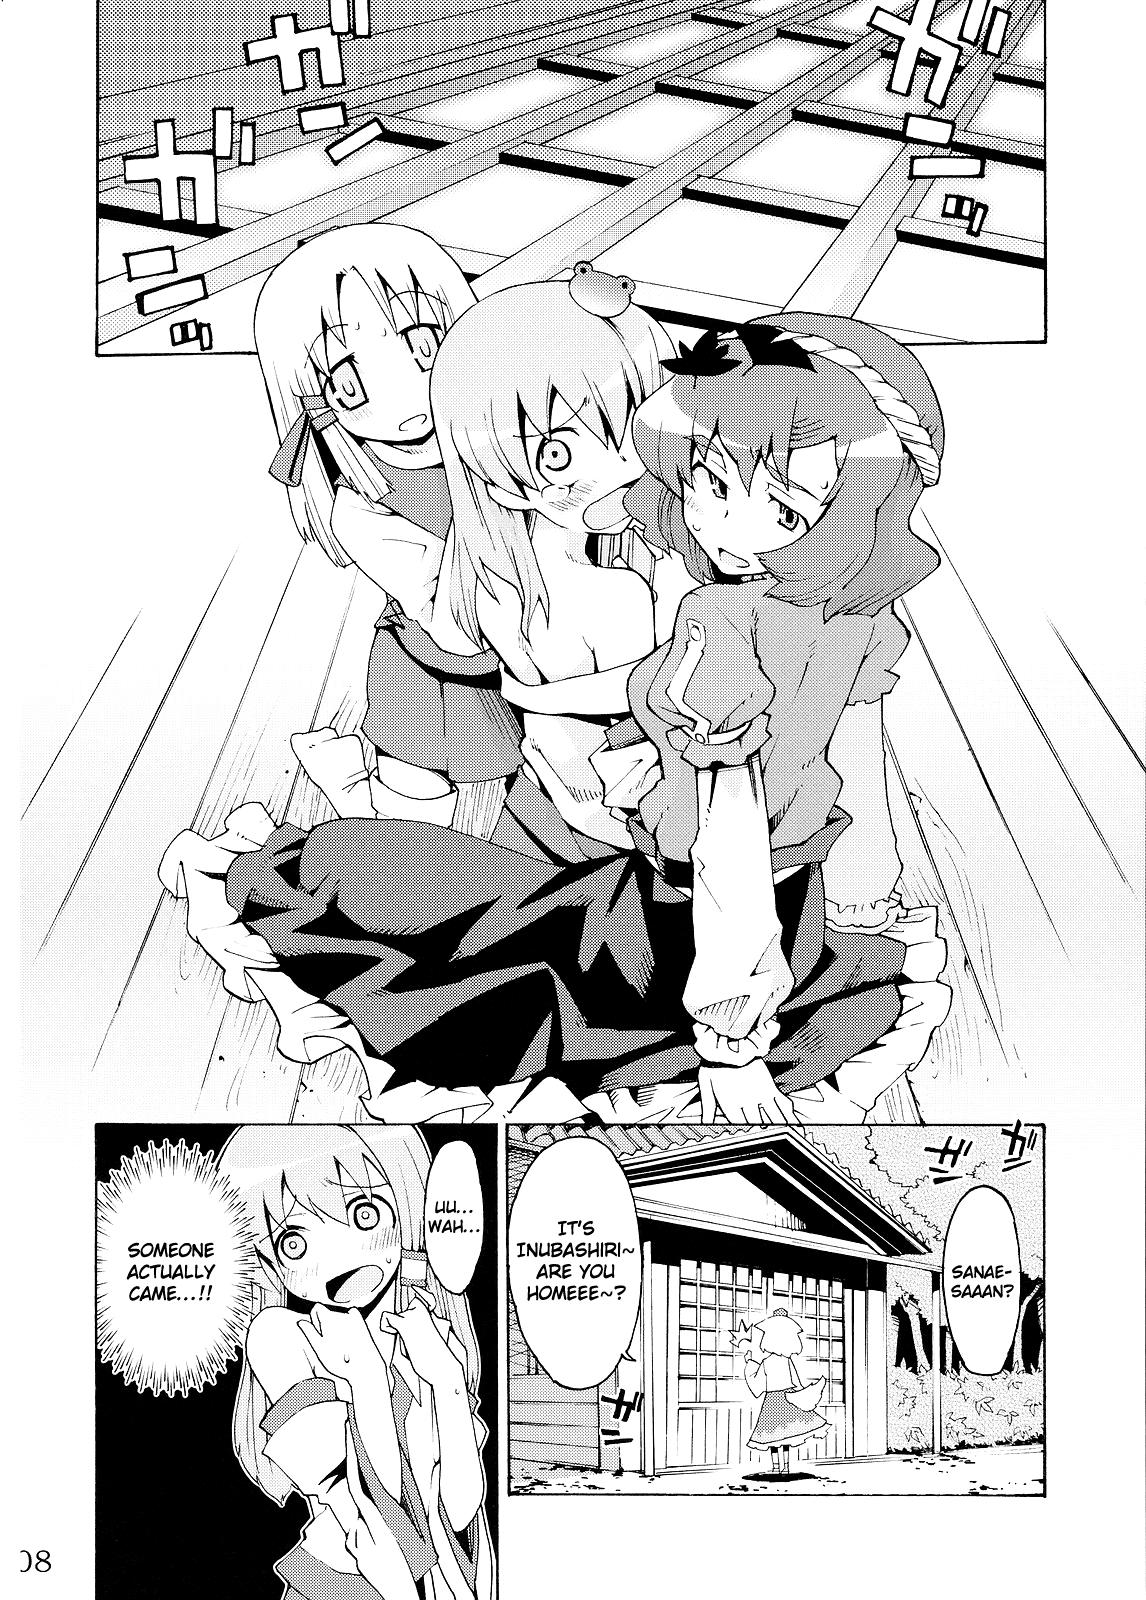 Ftvgirls Kami-sama to Issho! Happy every day! - Touhou project Home - Page 8